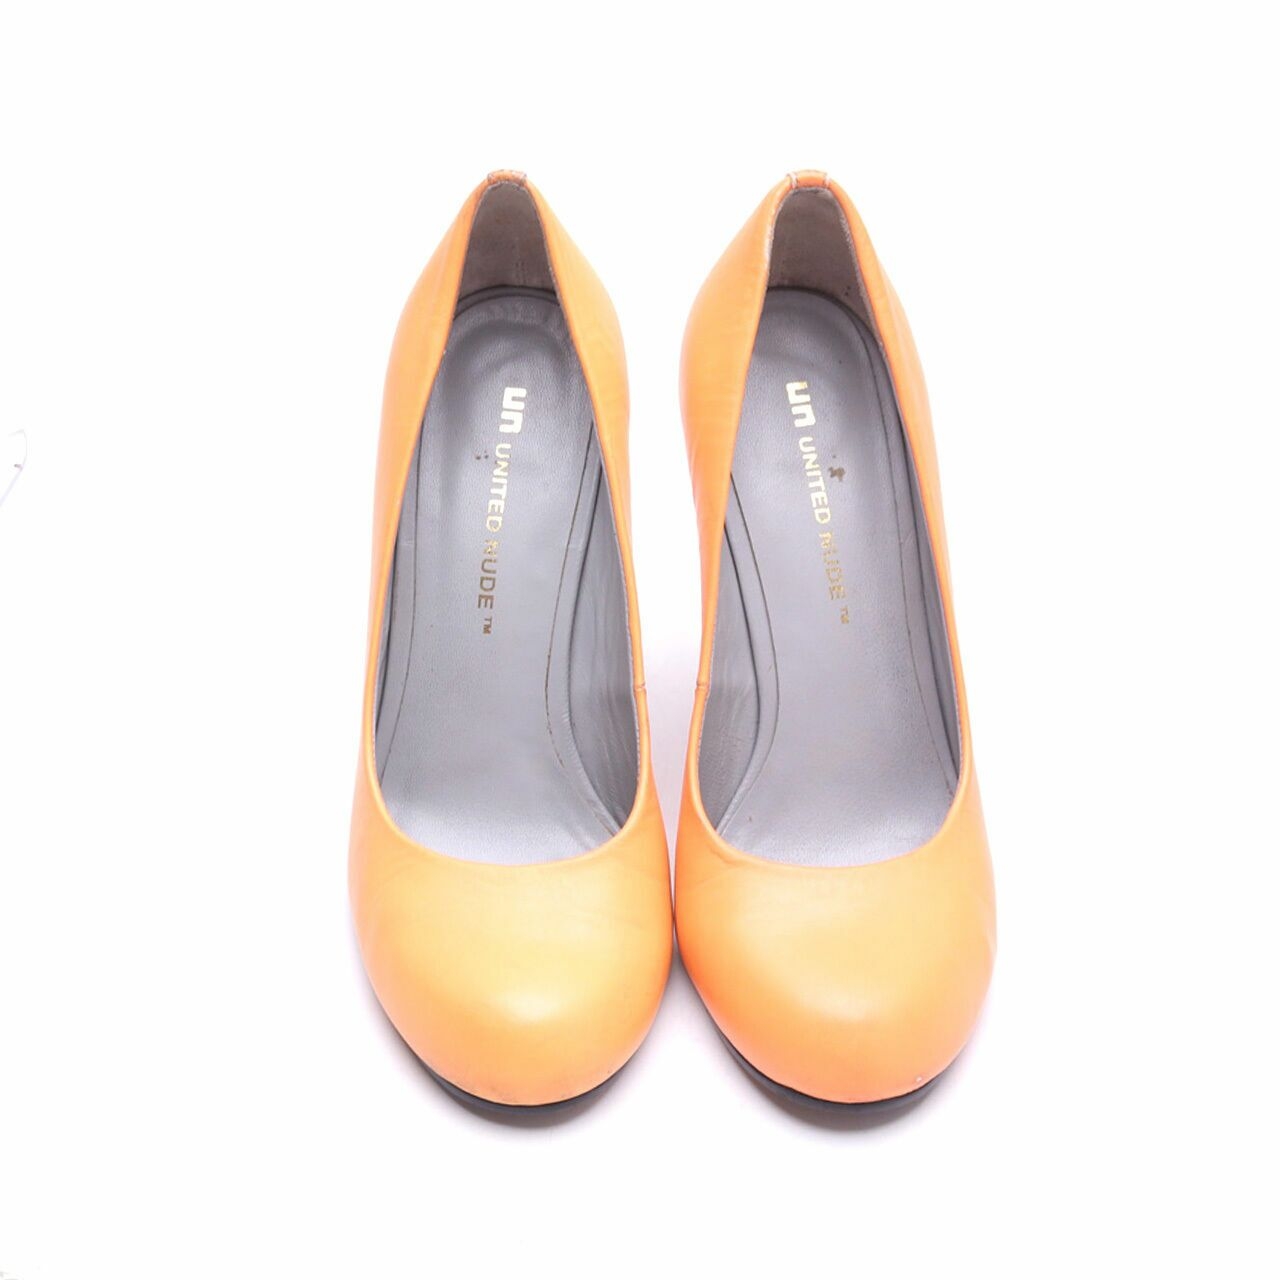 United Nude Eamz  Neon Patent Pumps Invisible Heels